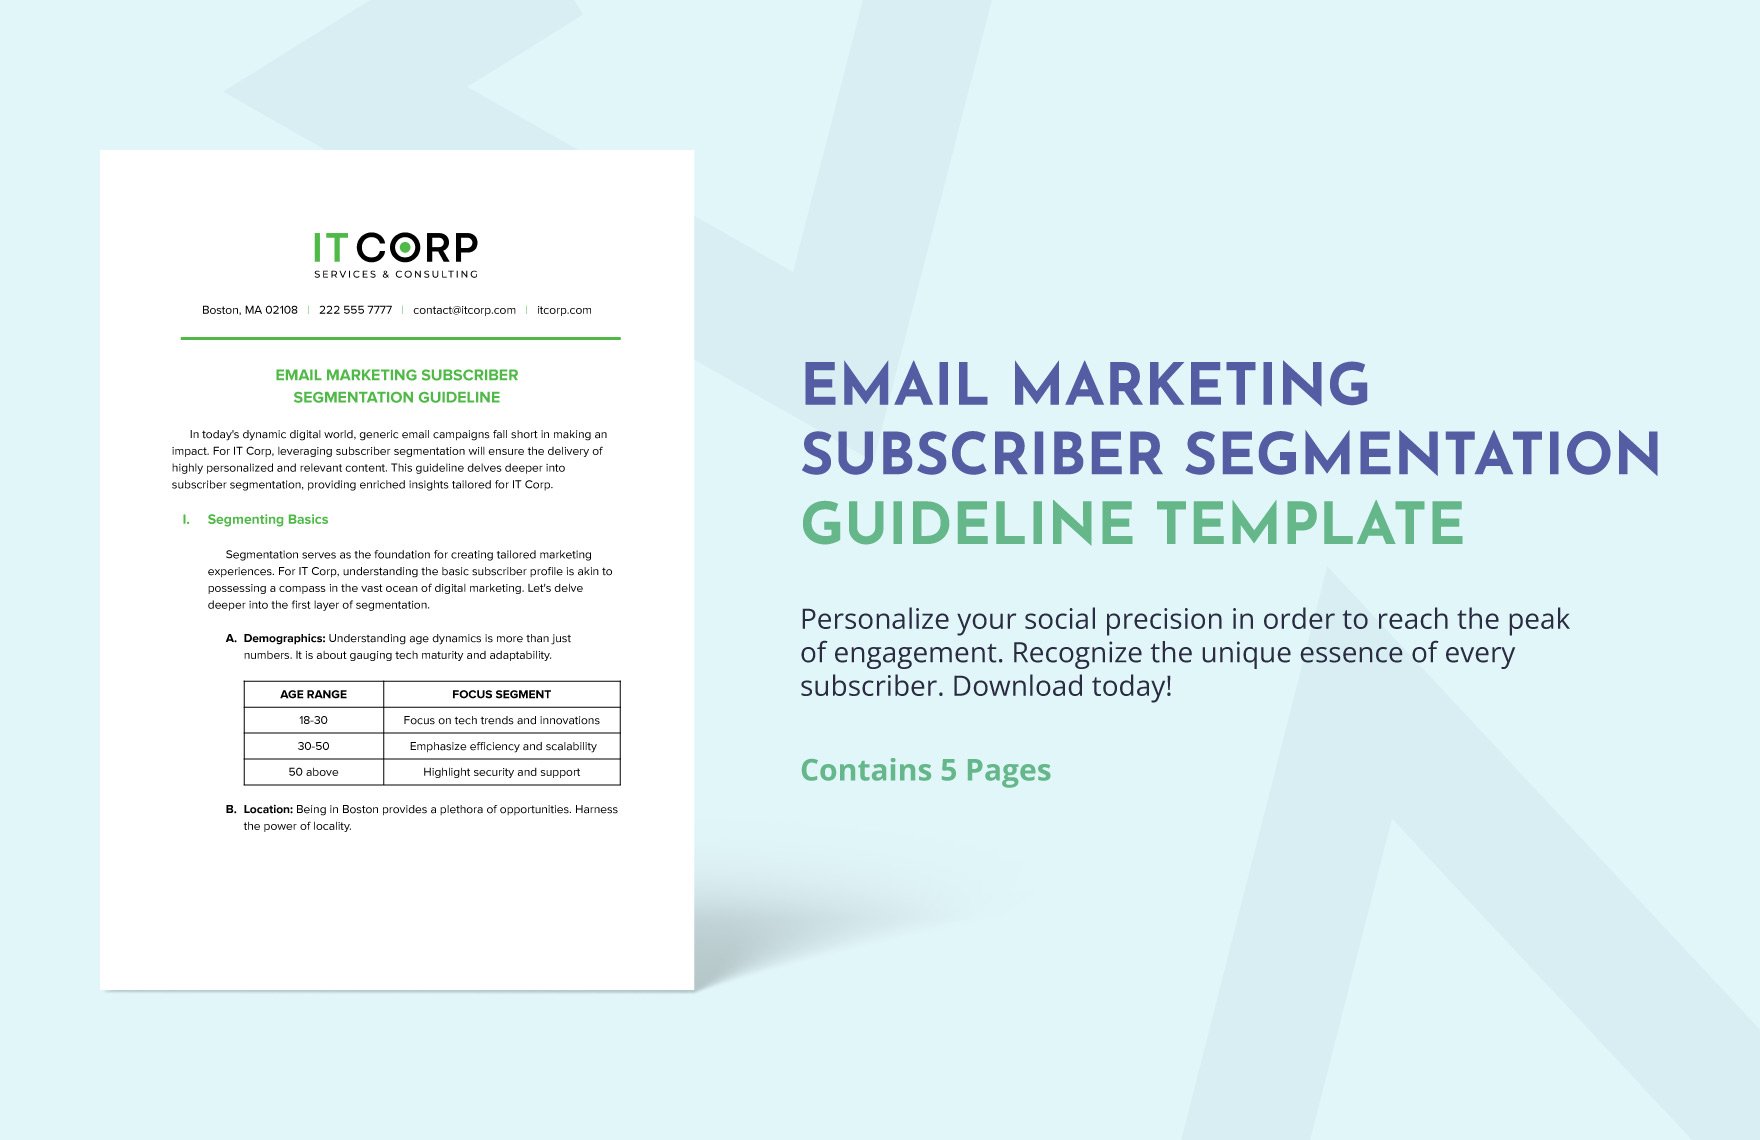 Email Marketing Subscriber Segmentation Guideline Template in Word, Google Docs, PDF